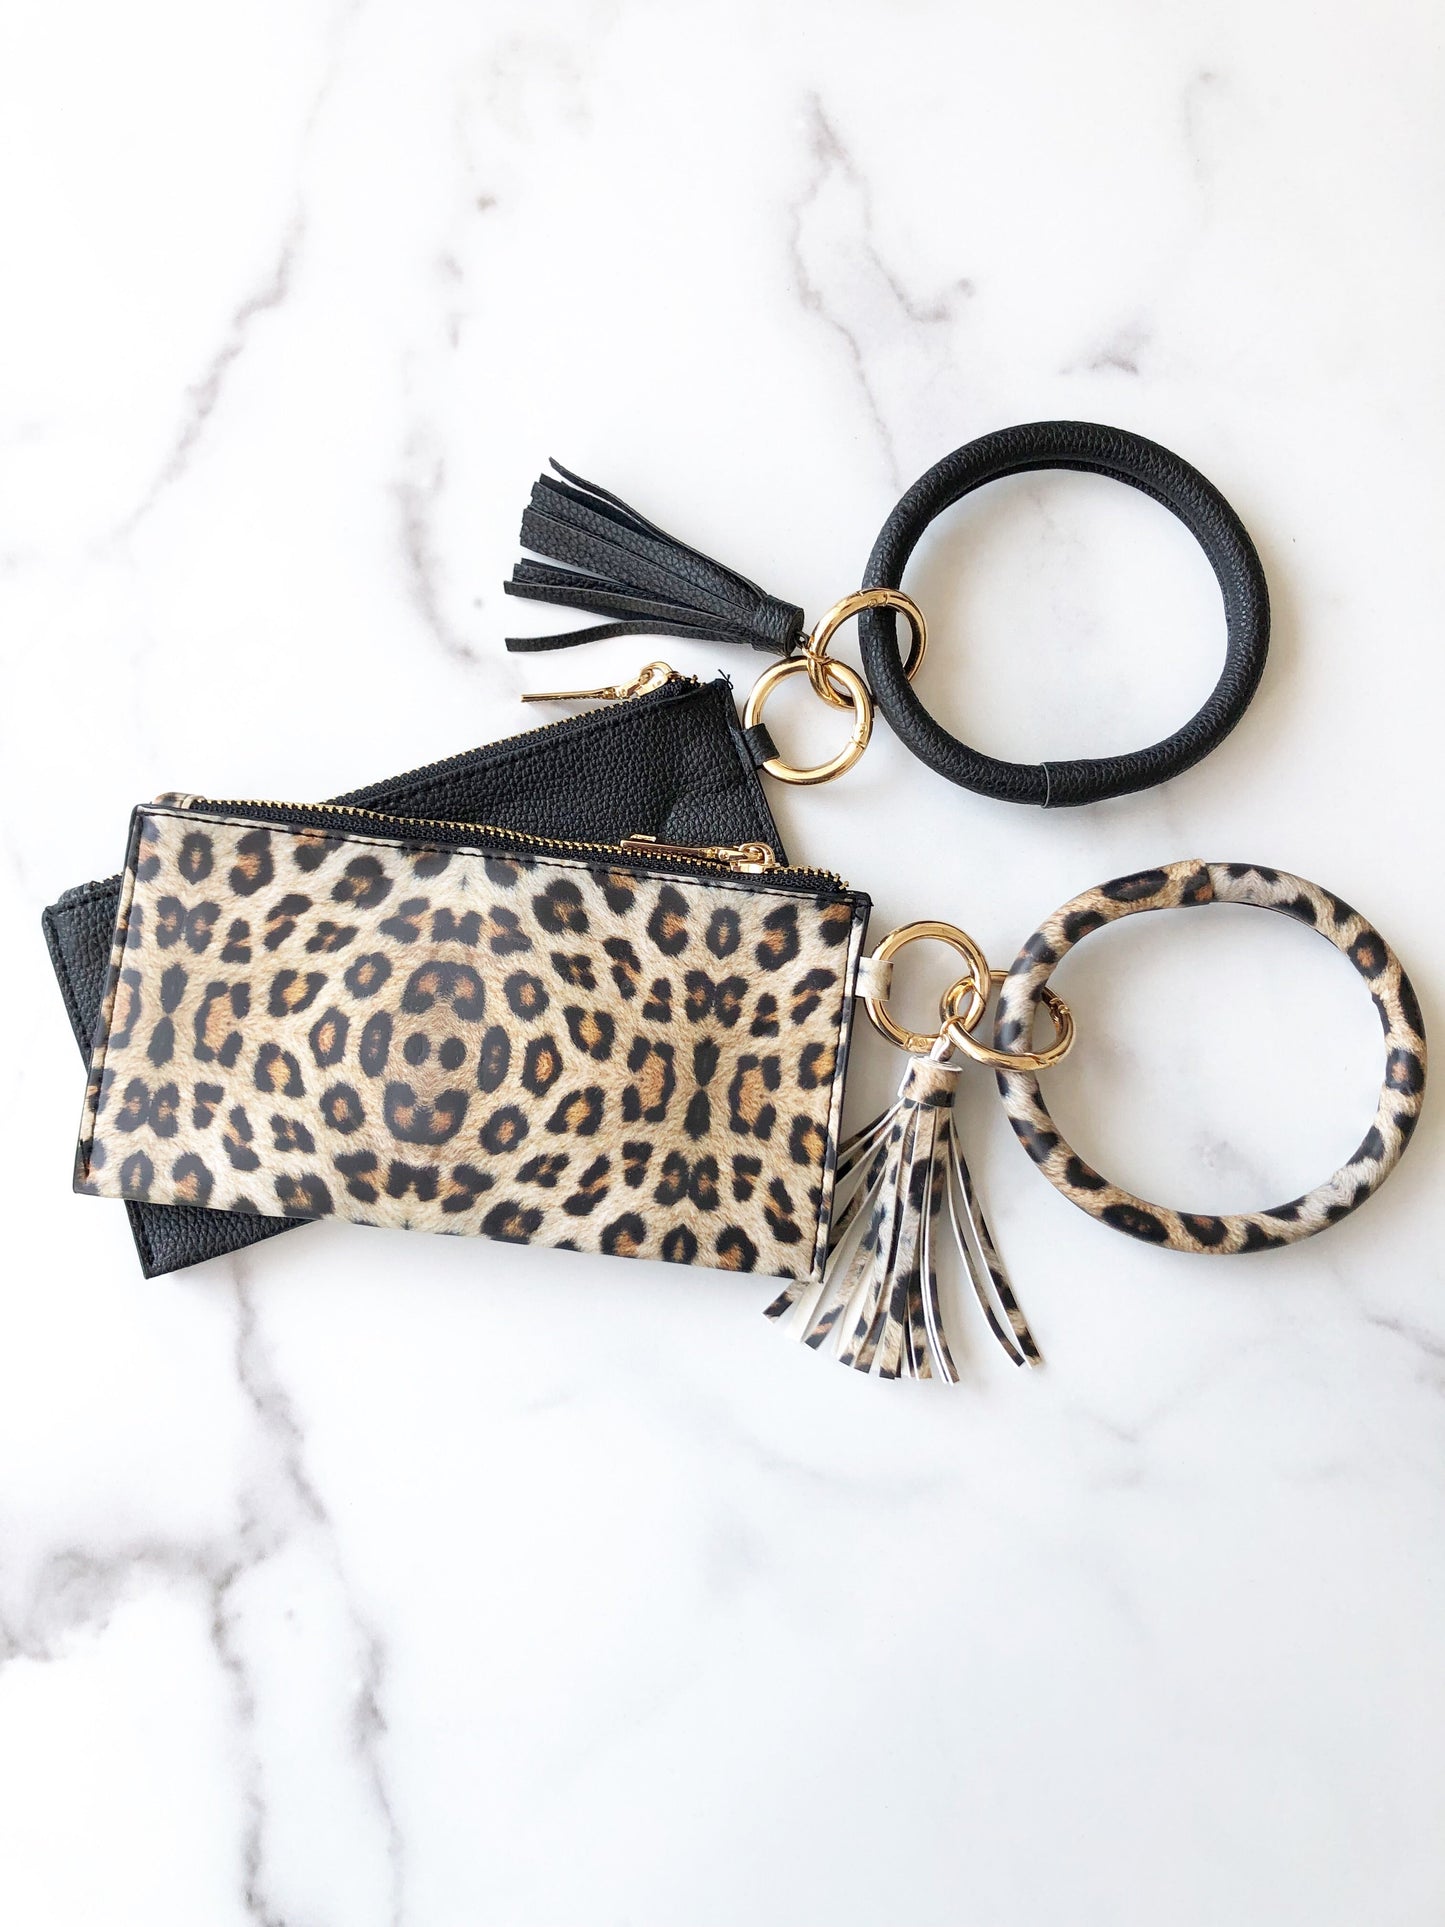 Jenny Hands Free Bangle Keychain with Tassel and Wristlet-Brown Snake